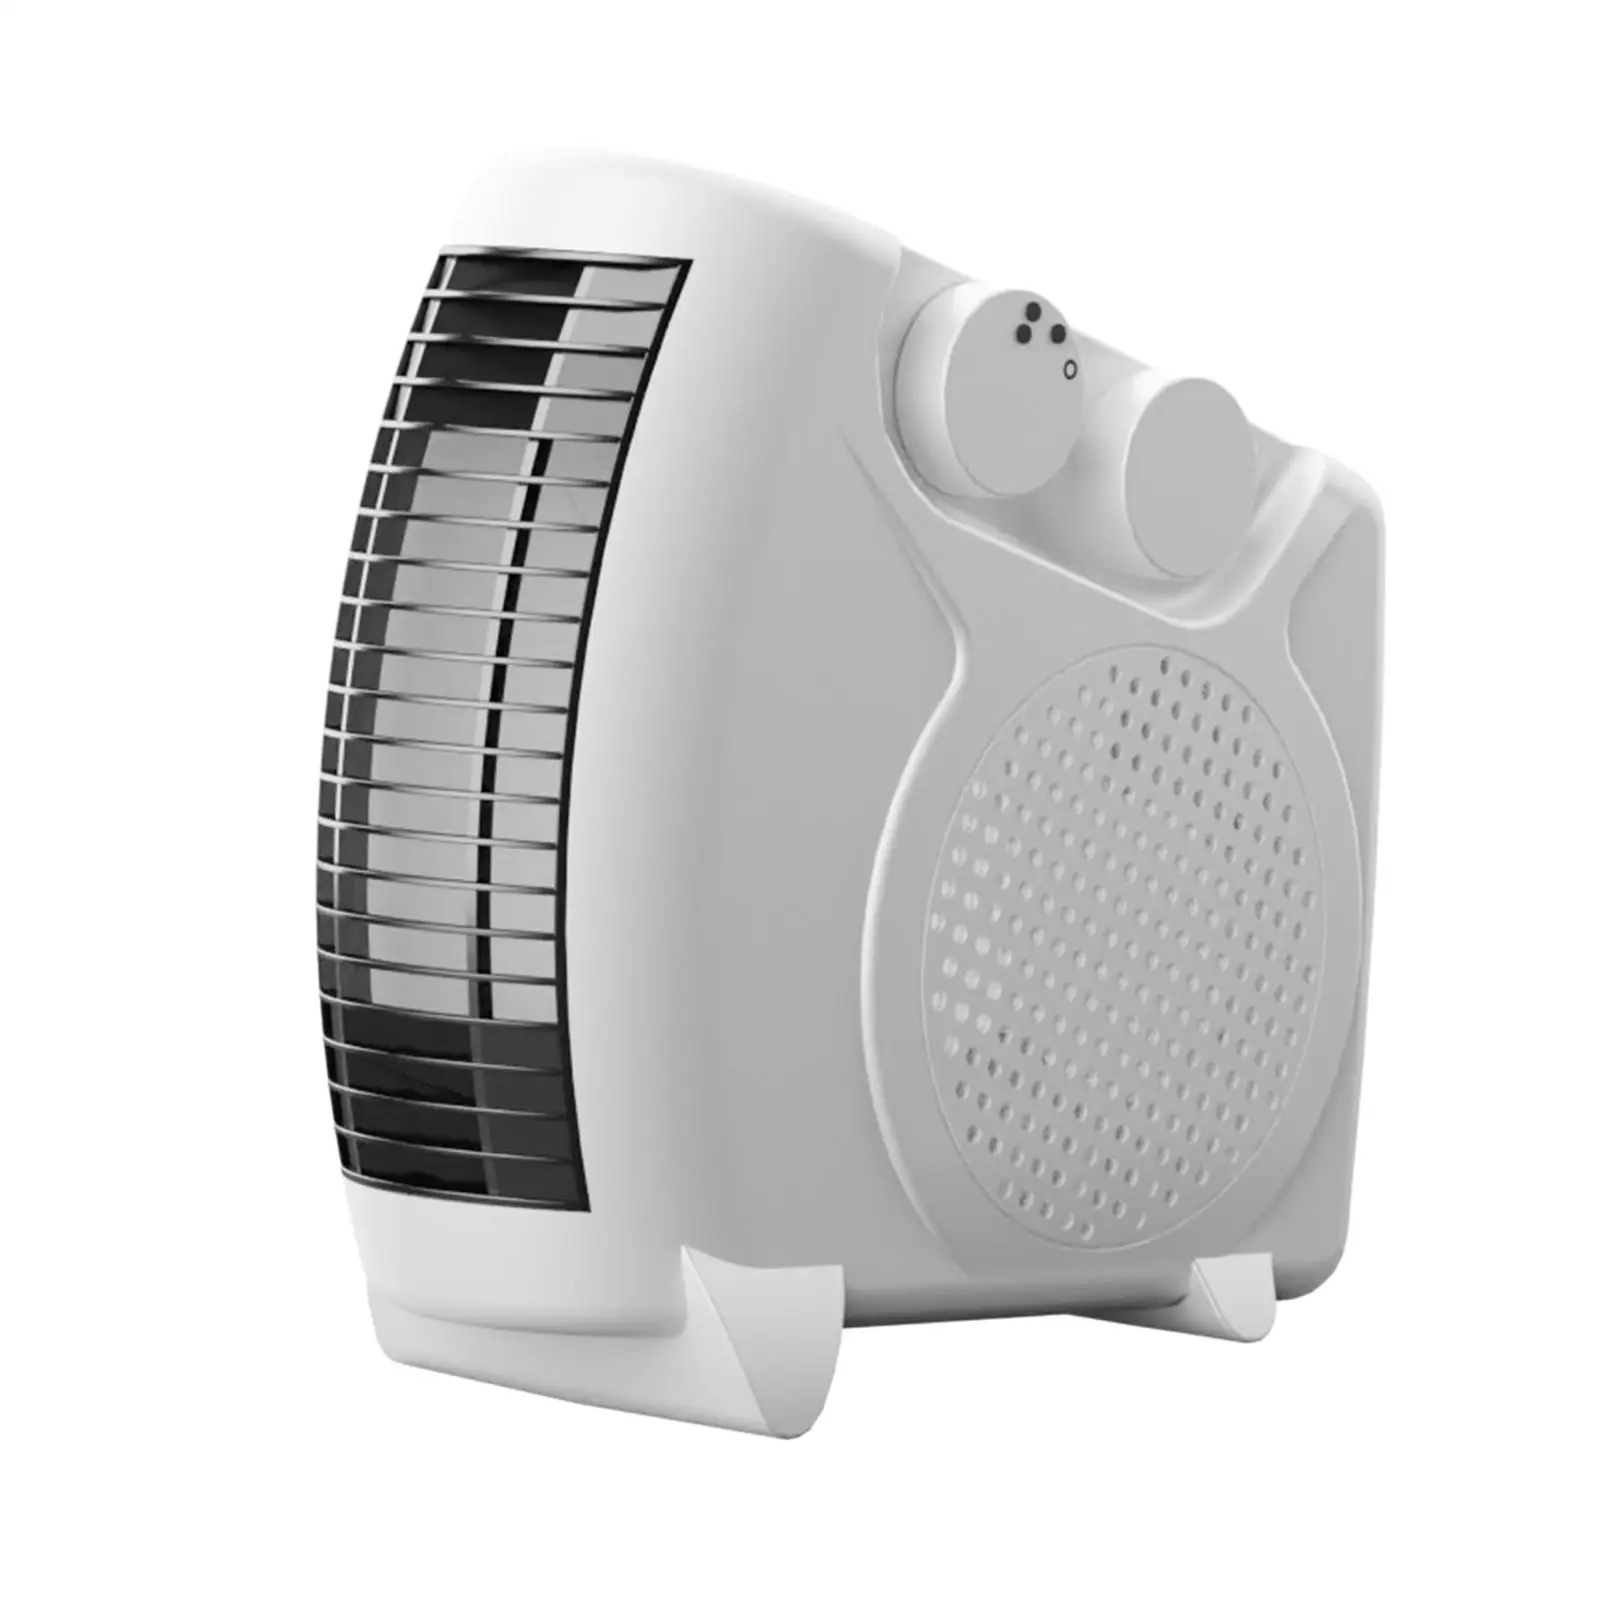 Electric Desktop Space Heater 1200W Compact Size Auto Off Protection Household Fan Heater for Living Room Multifunctional Sturdy